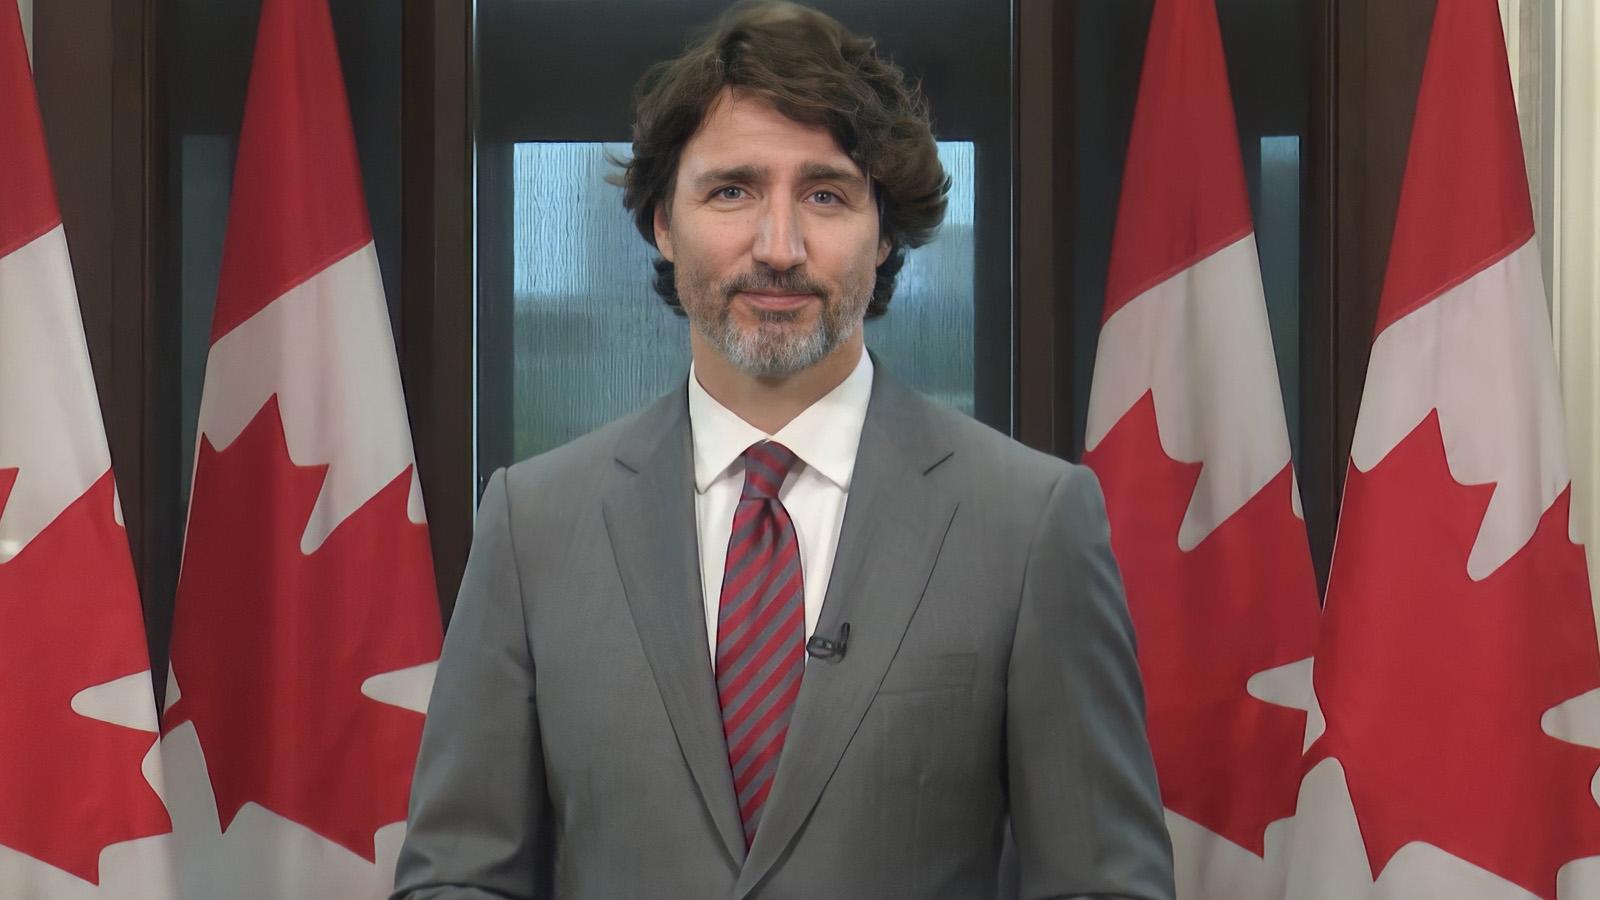 Justin Trudeau looking into the camera